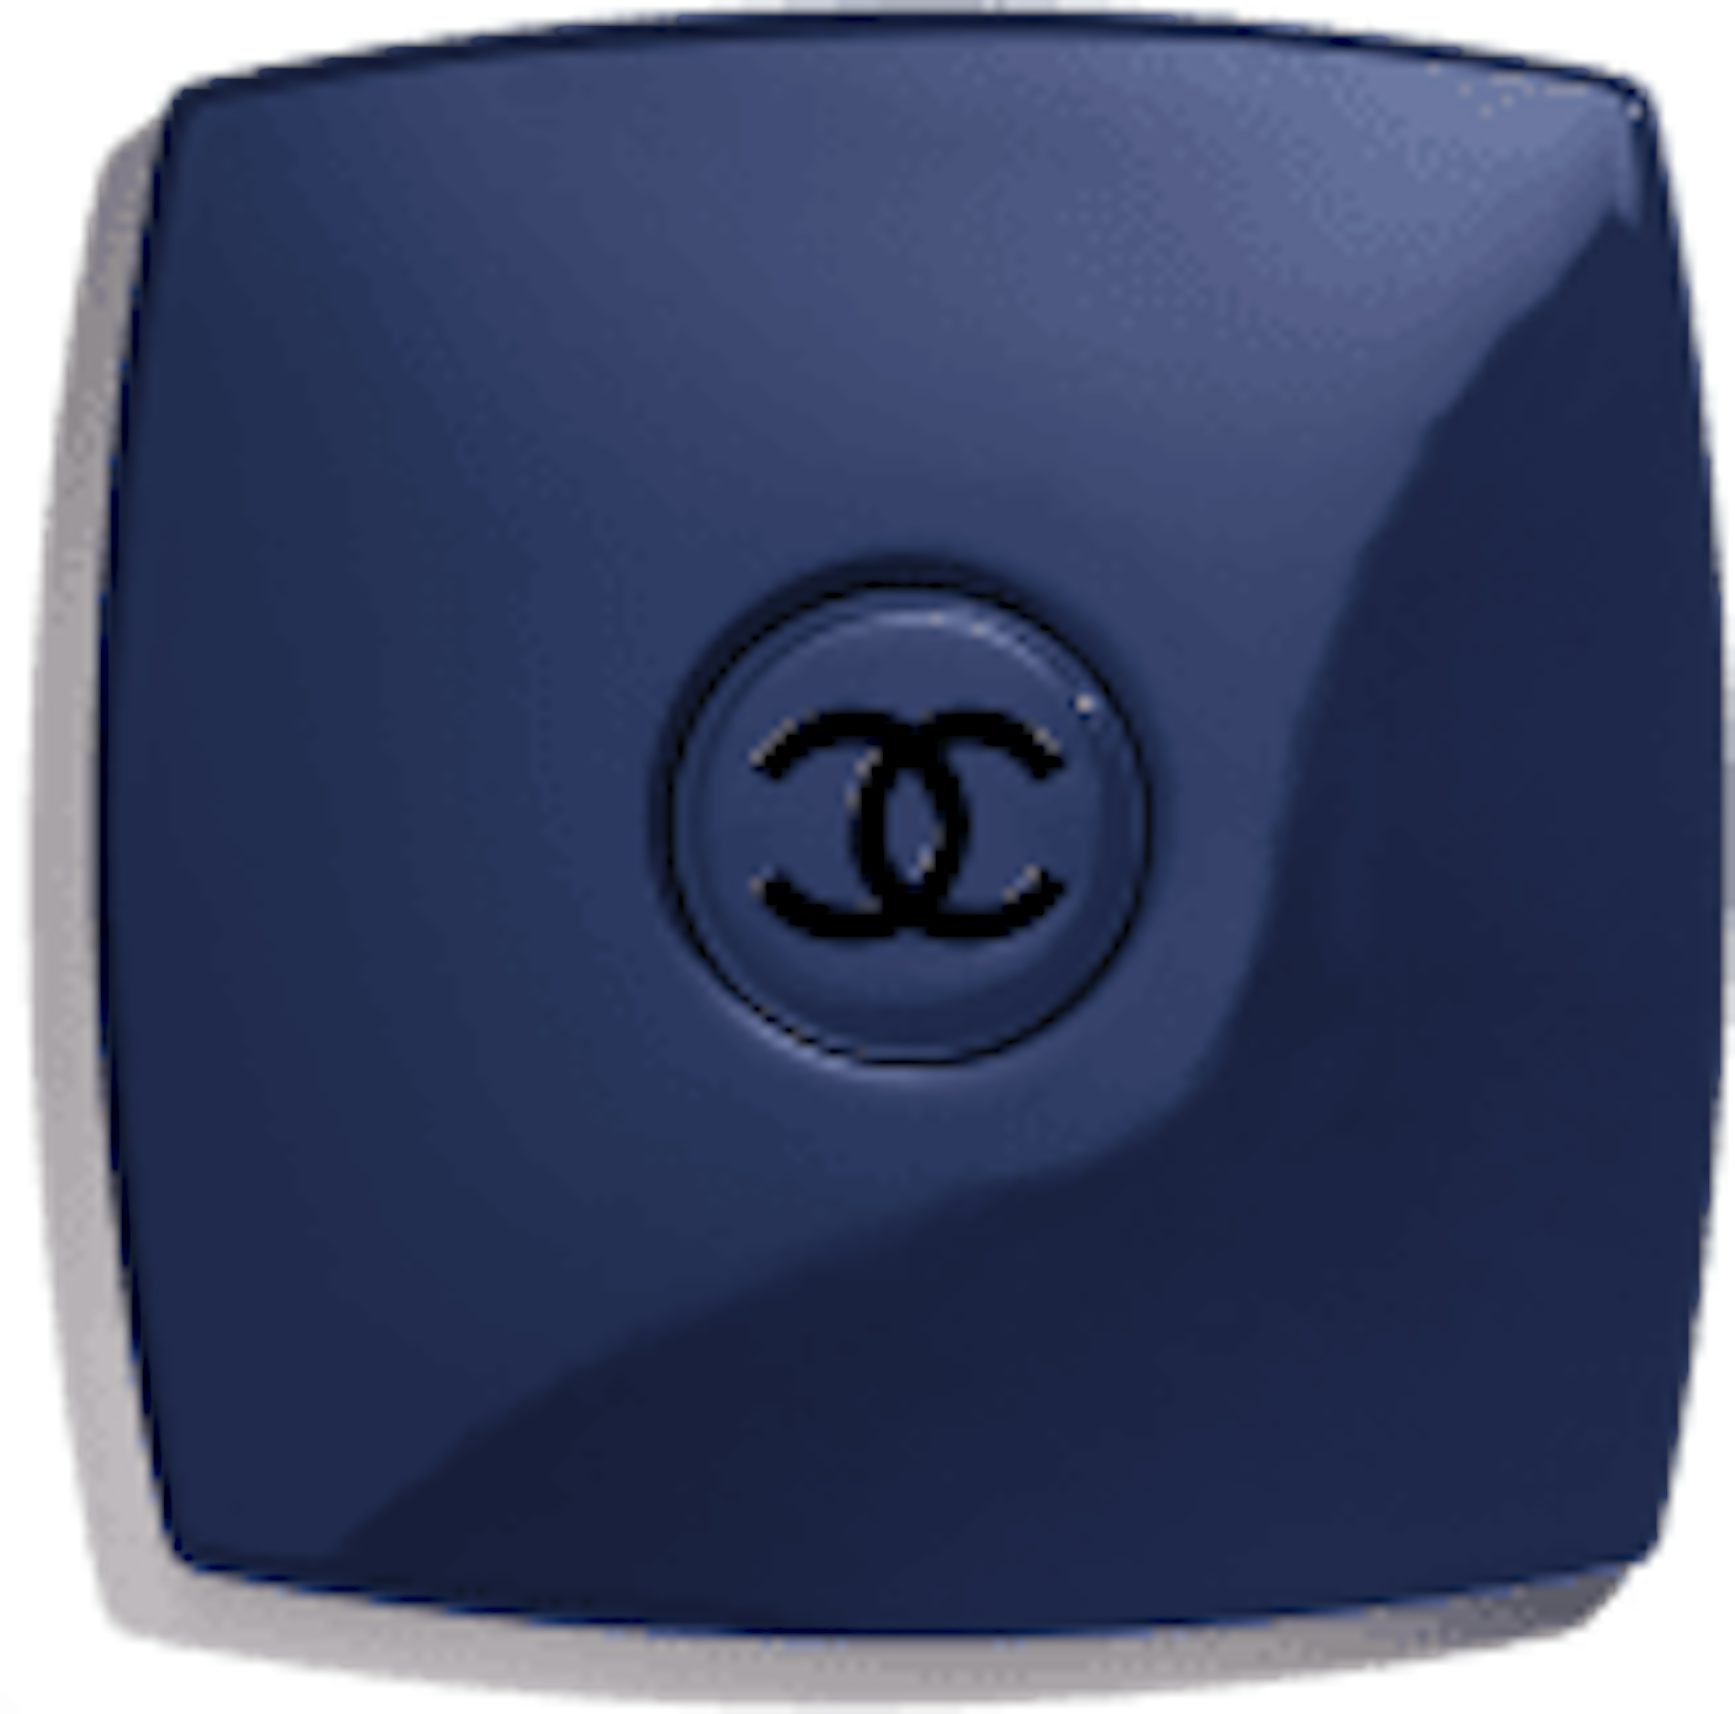 CHANEL, Makeup, Chanel 27 Fugueuse Limited Edition Mirror